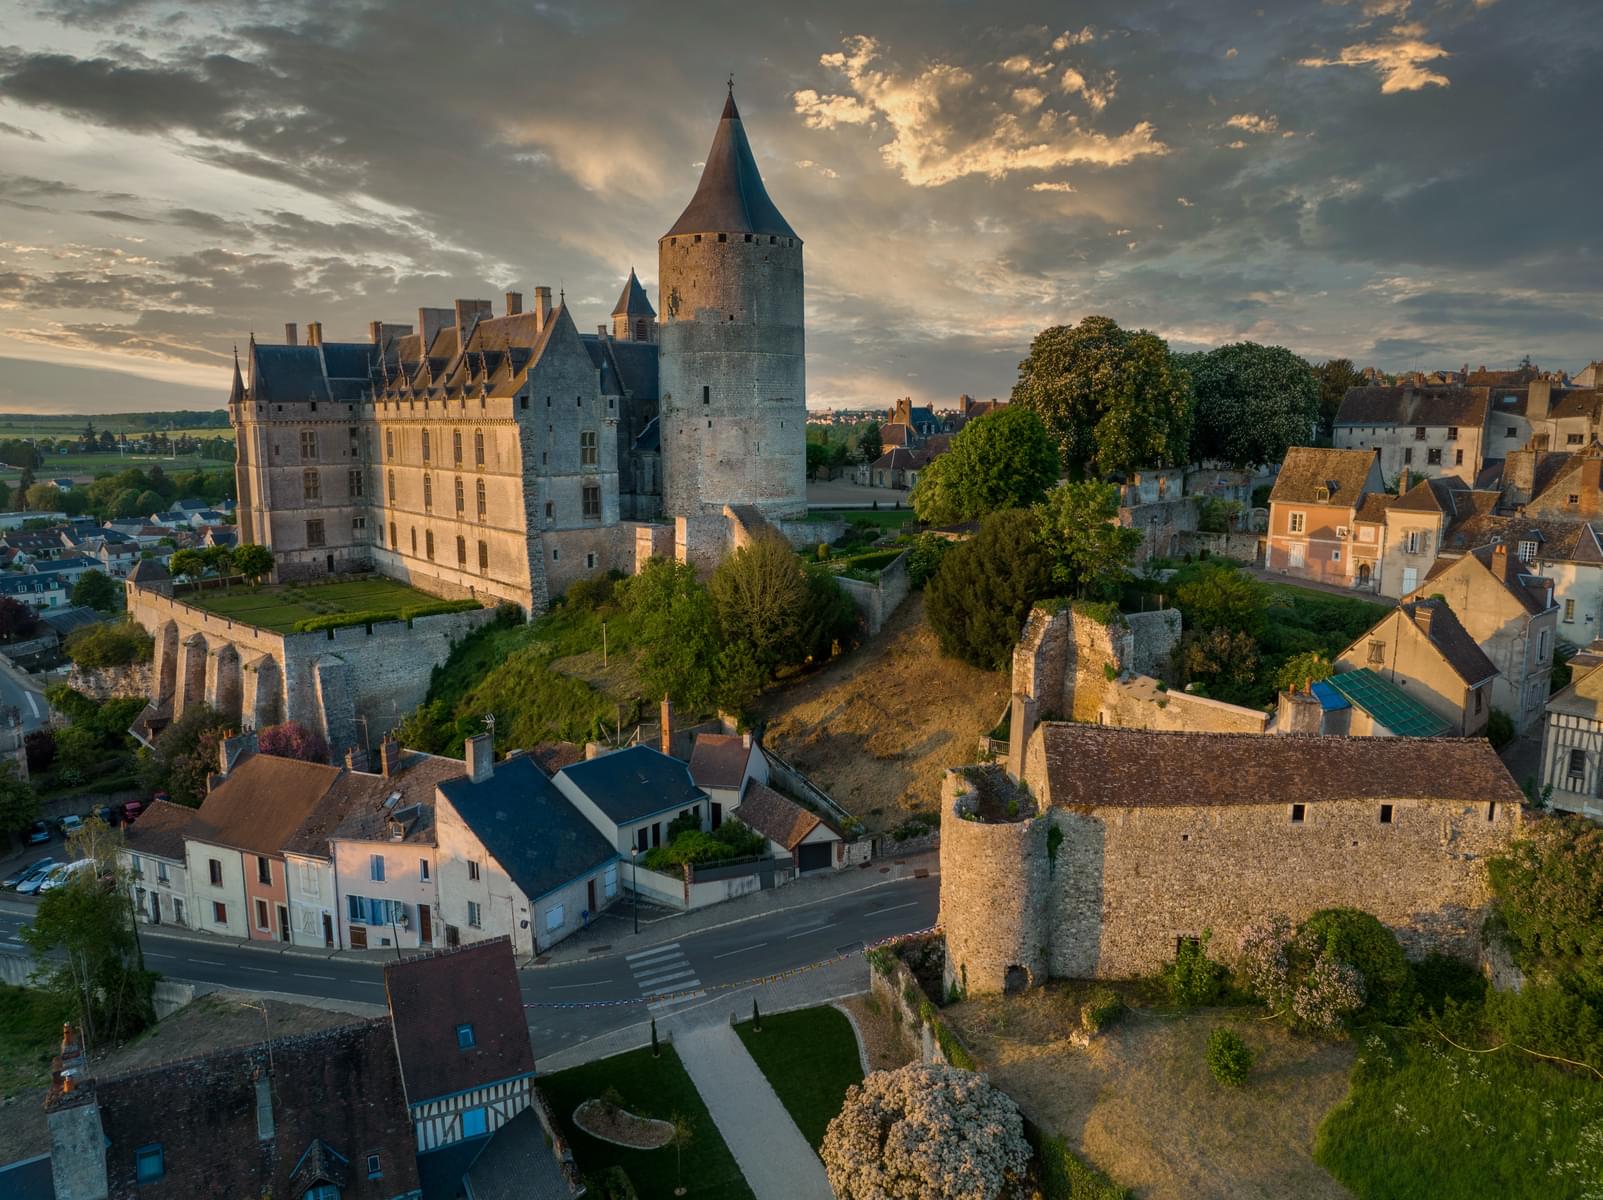 Know Before You Go Chateau de Chateaudun